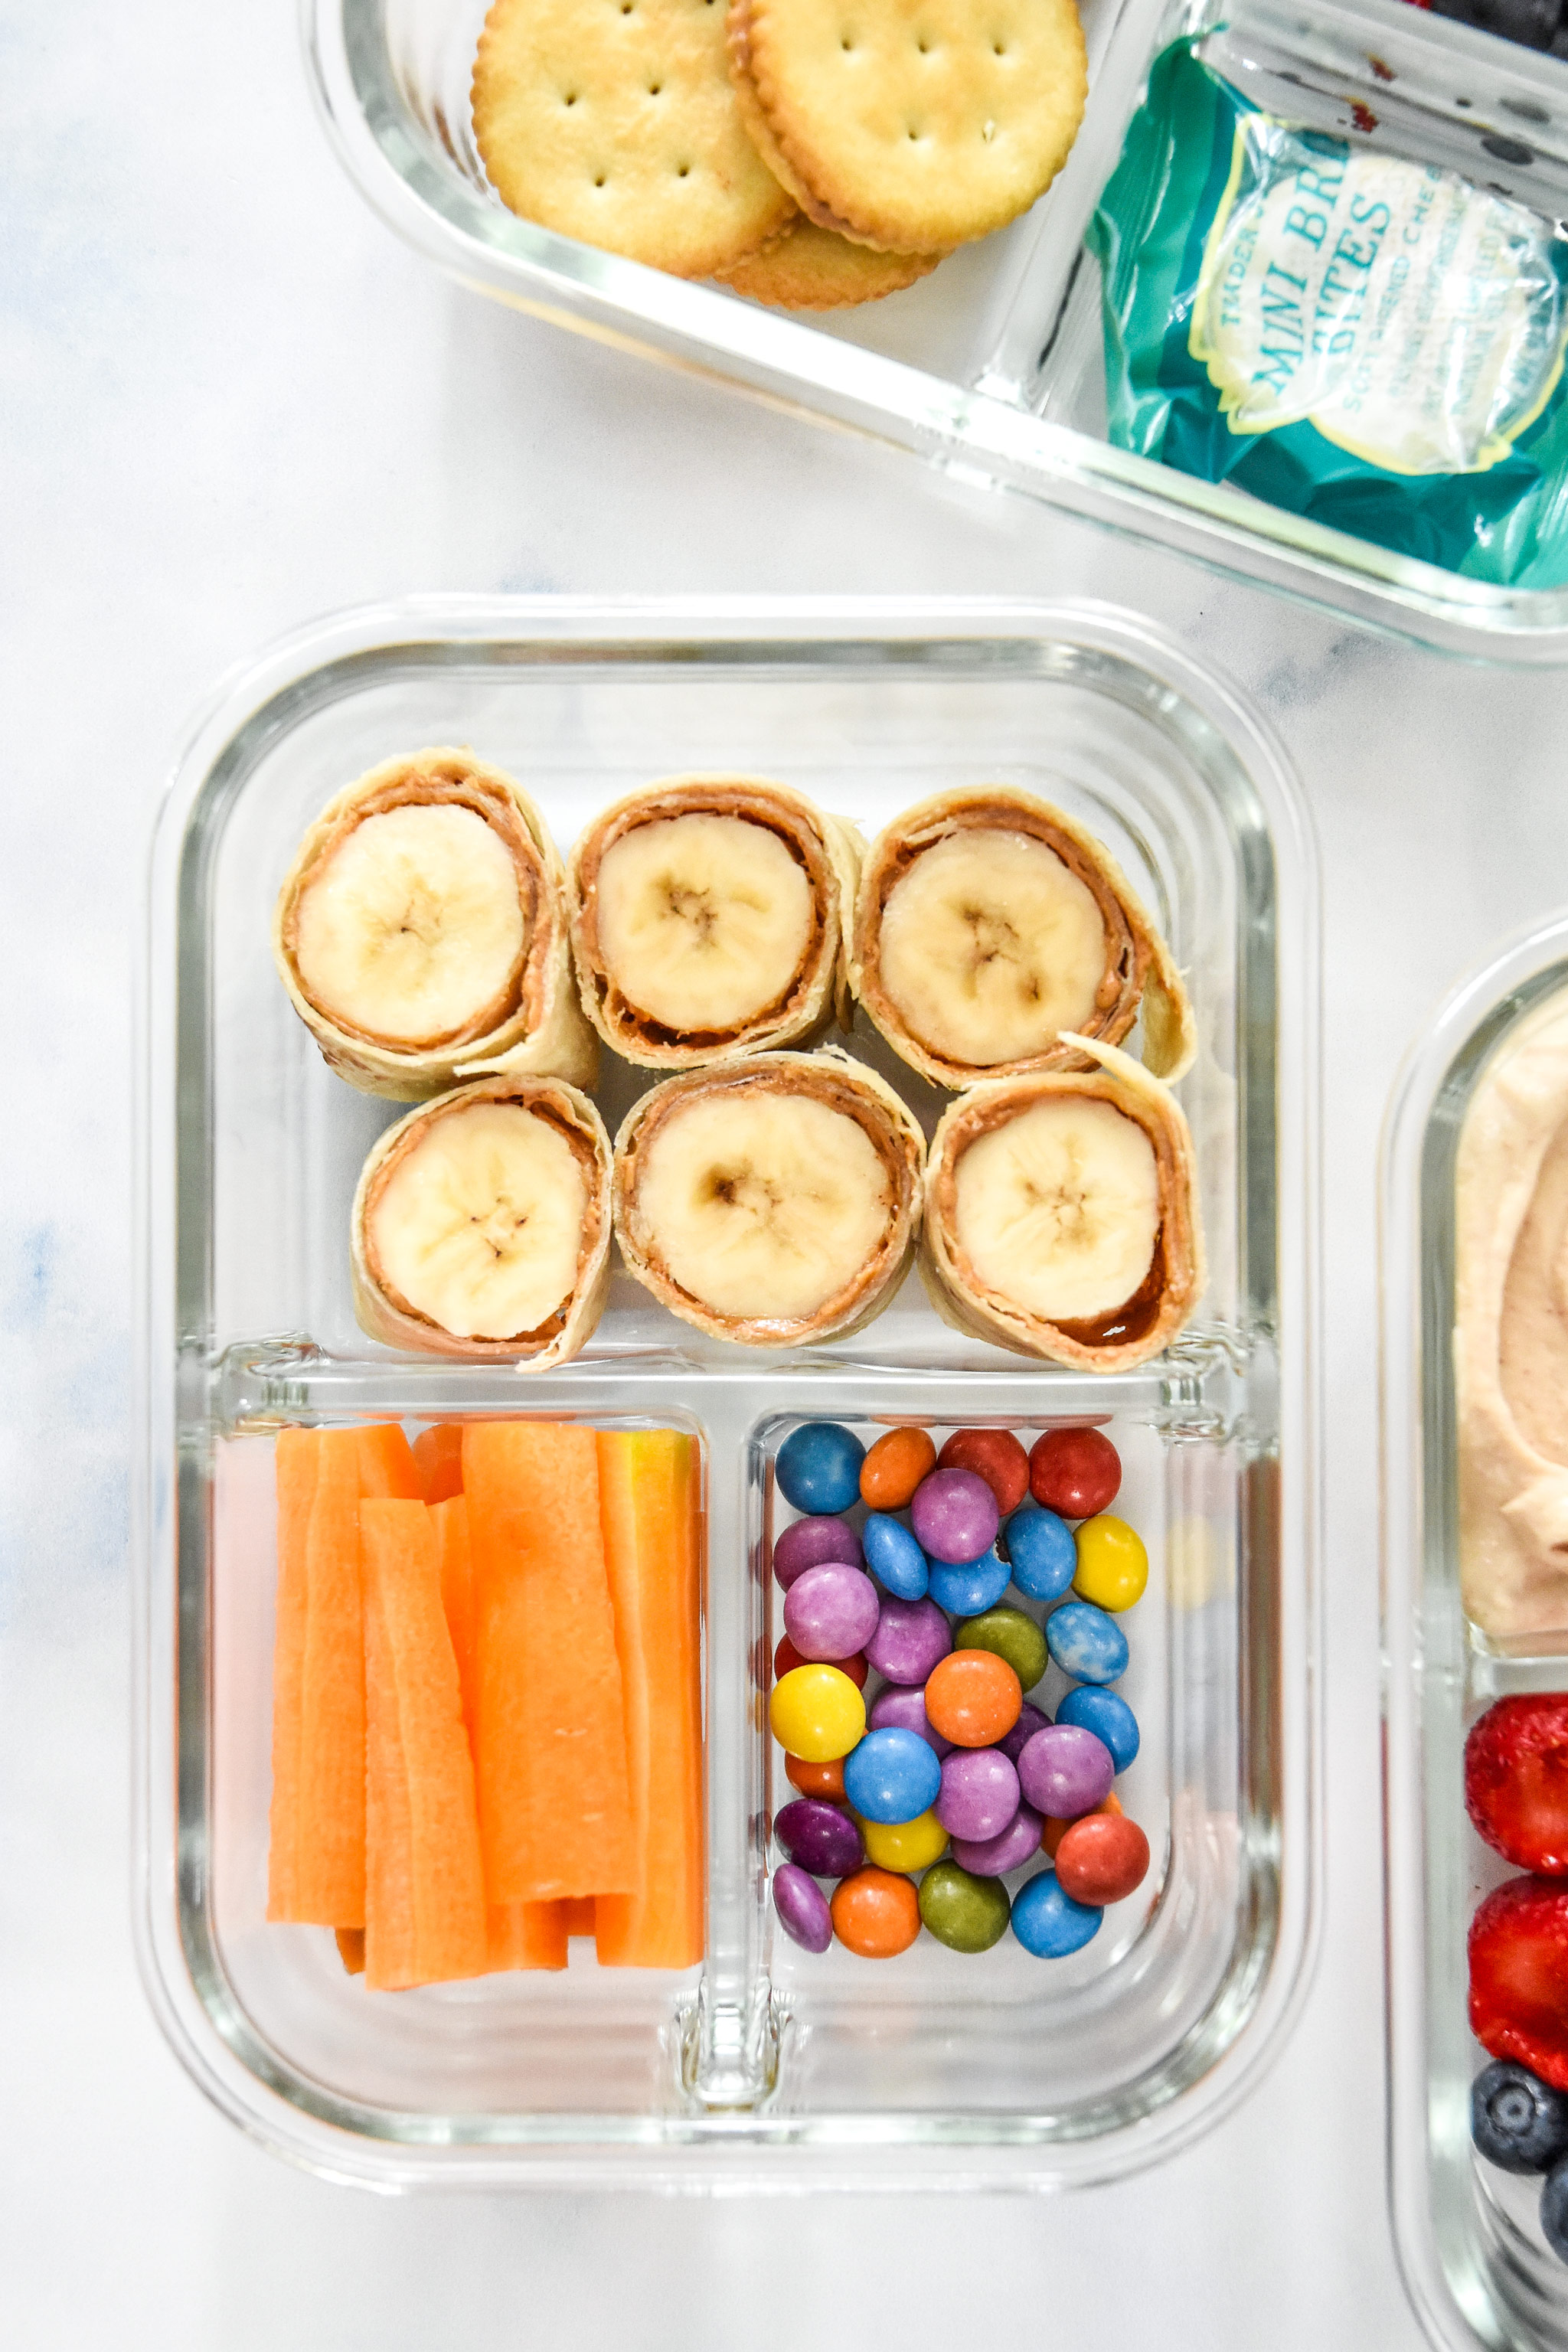 banana roll ups with carrot sticks and chocolate candies in a glass meal prep container.